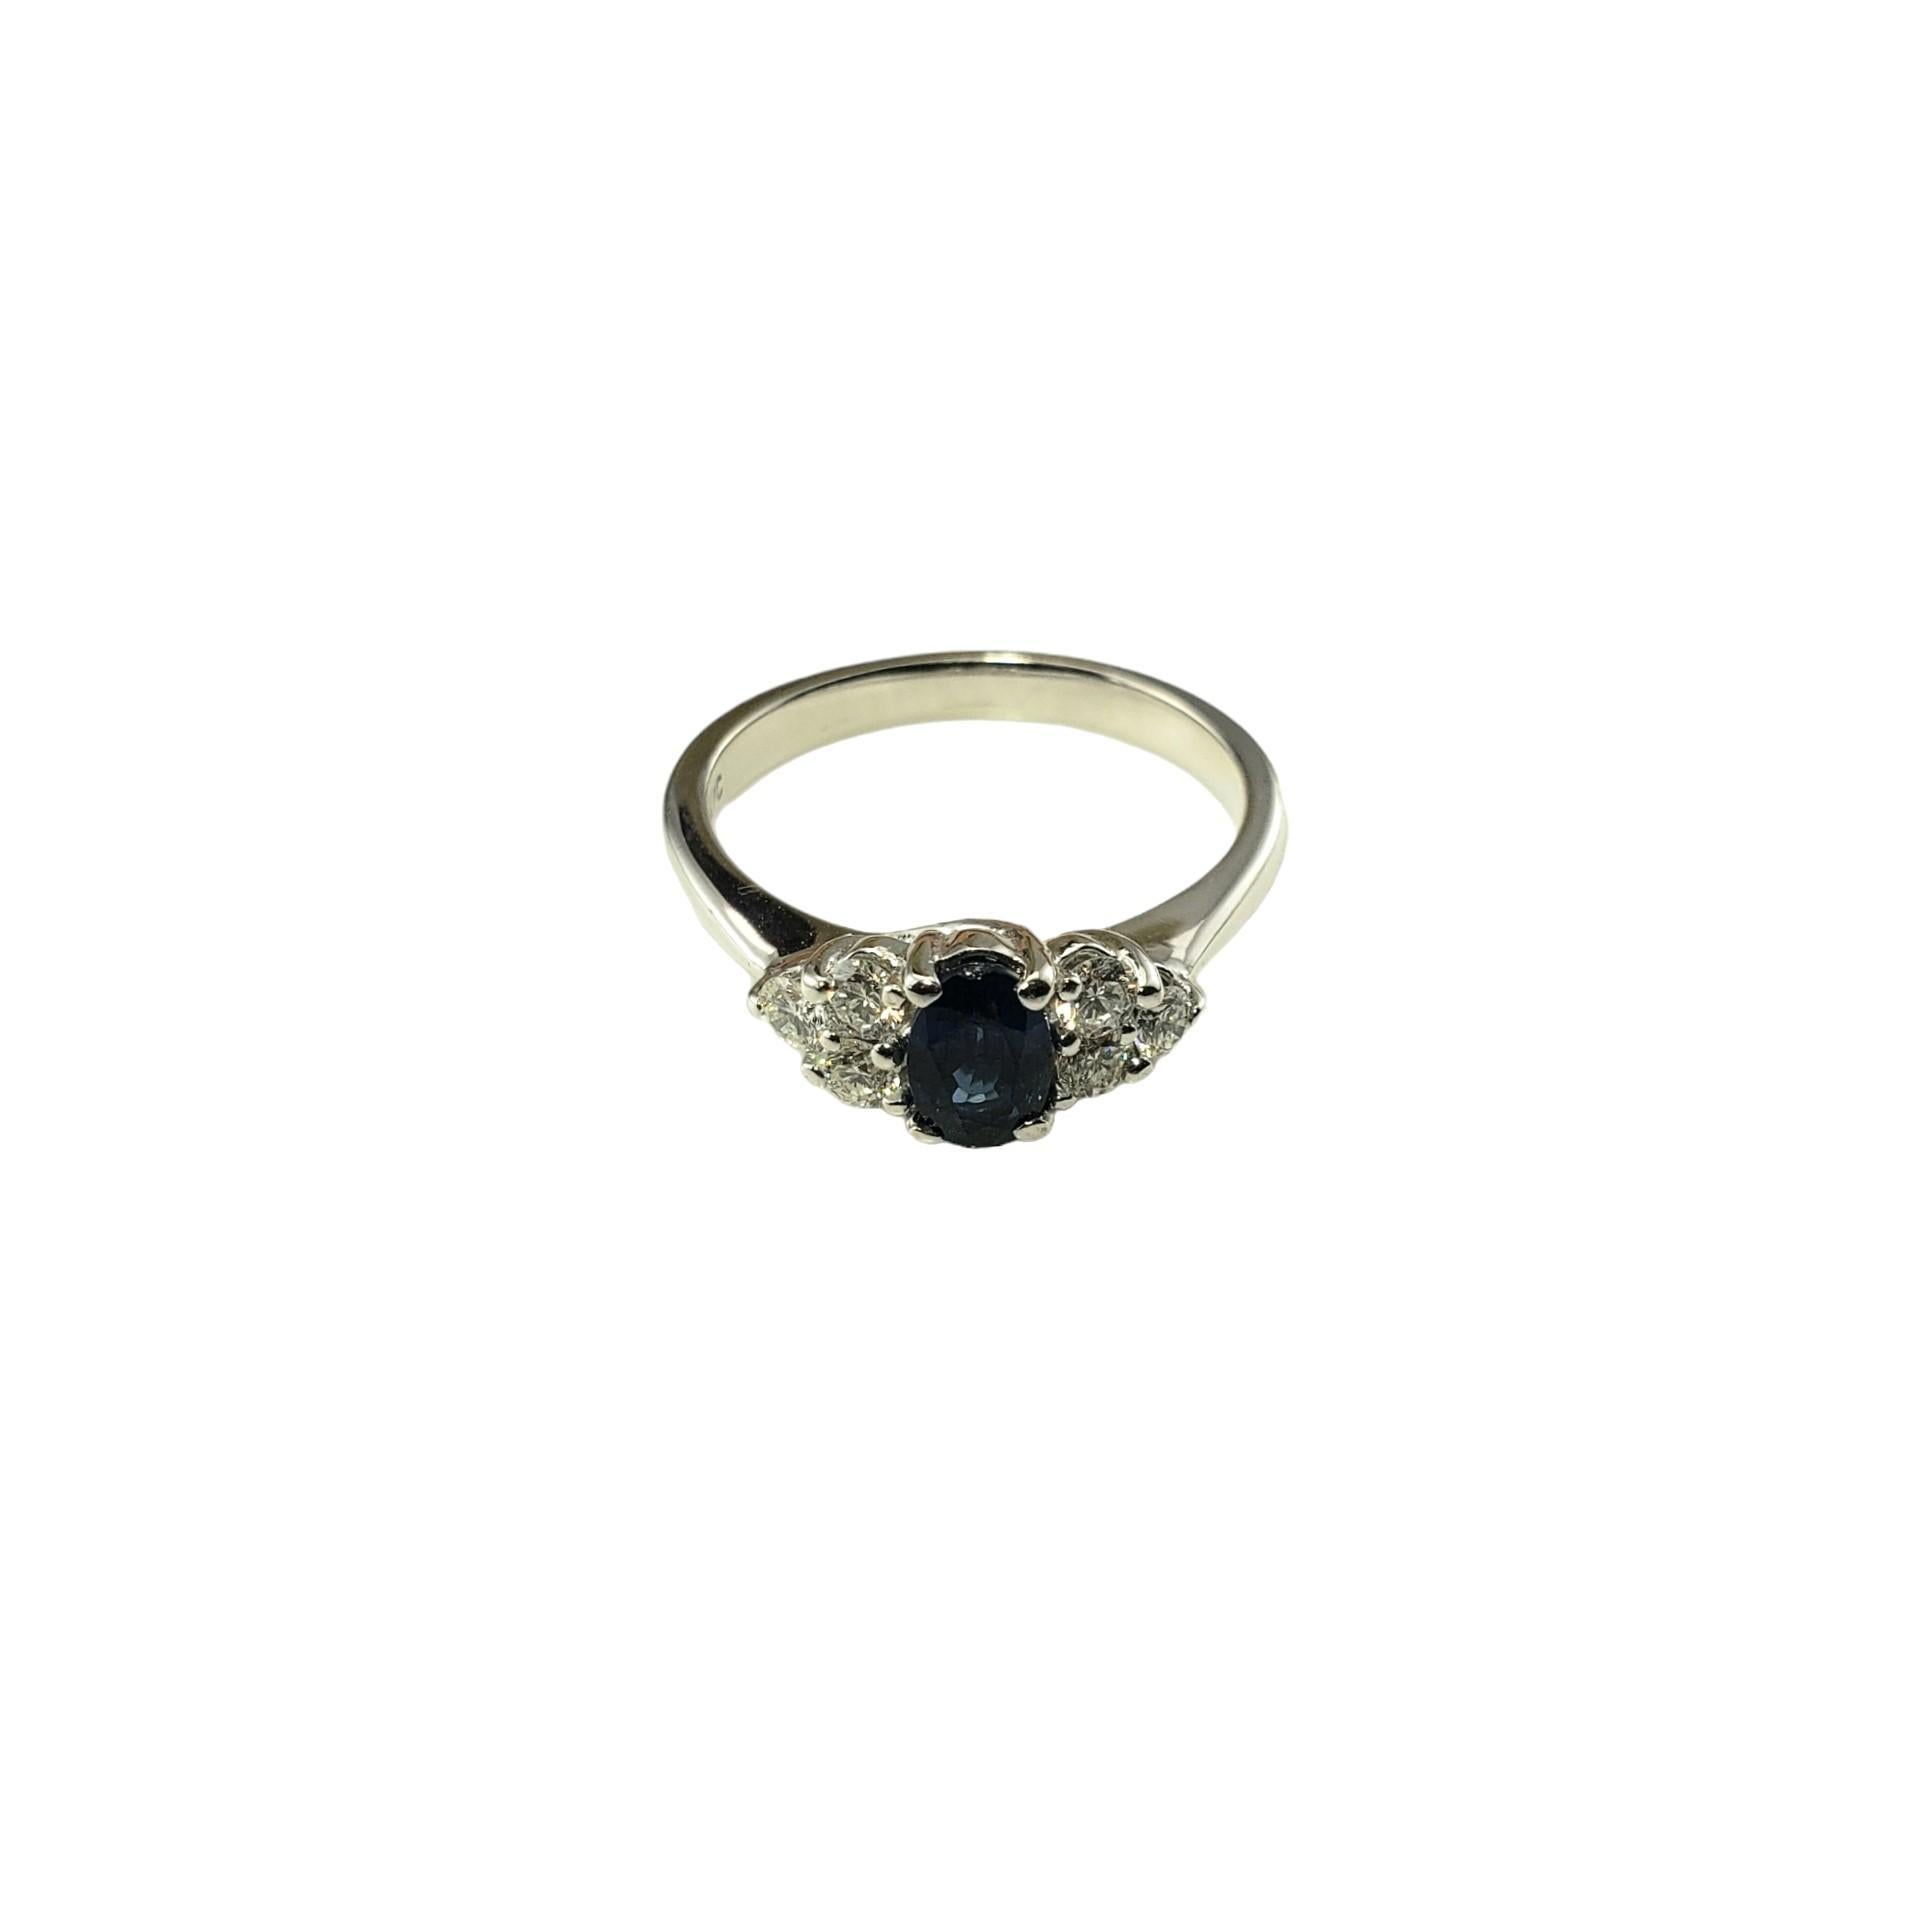 Vintage 14 Karat White Gold Sapphire and Diamond Ring Size 6.25 JAGi Certified-

This lovely ring features one oval sapphire (5.9 mm x 4.0 mm) and six round brilliant cut diamonds set in classic 14K white gold.  Shank:  2.4 mm.

Sapphire weight: 